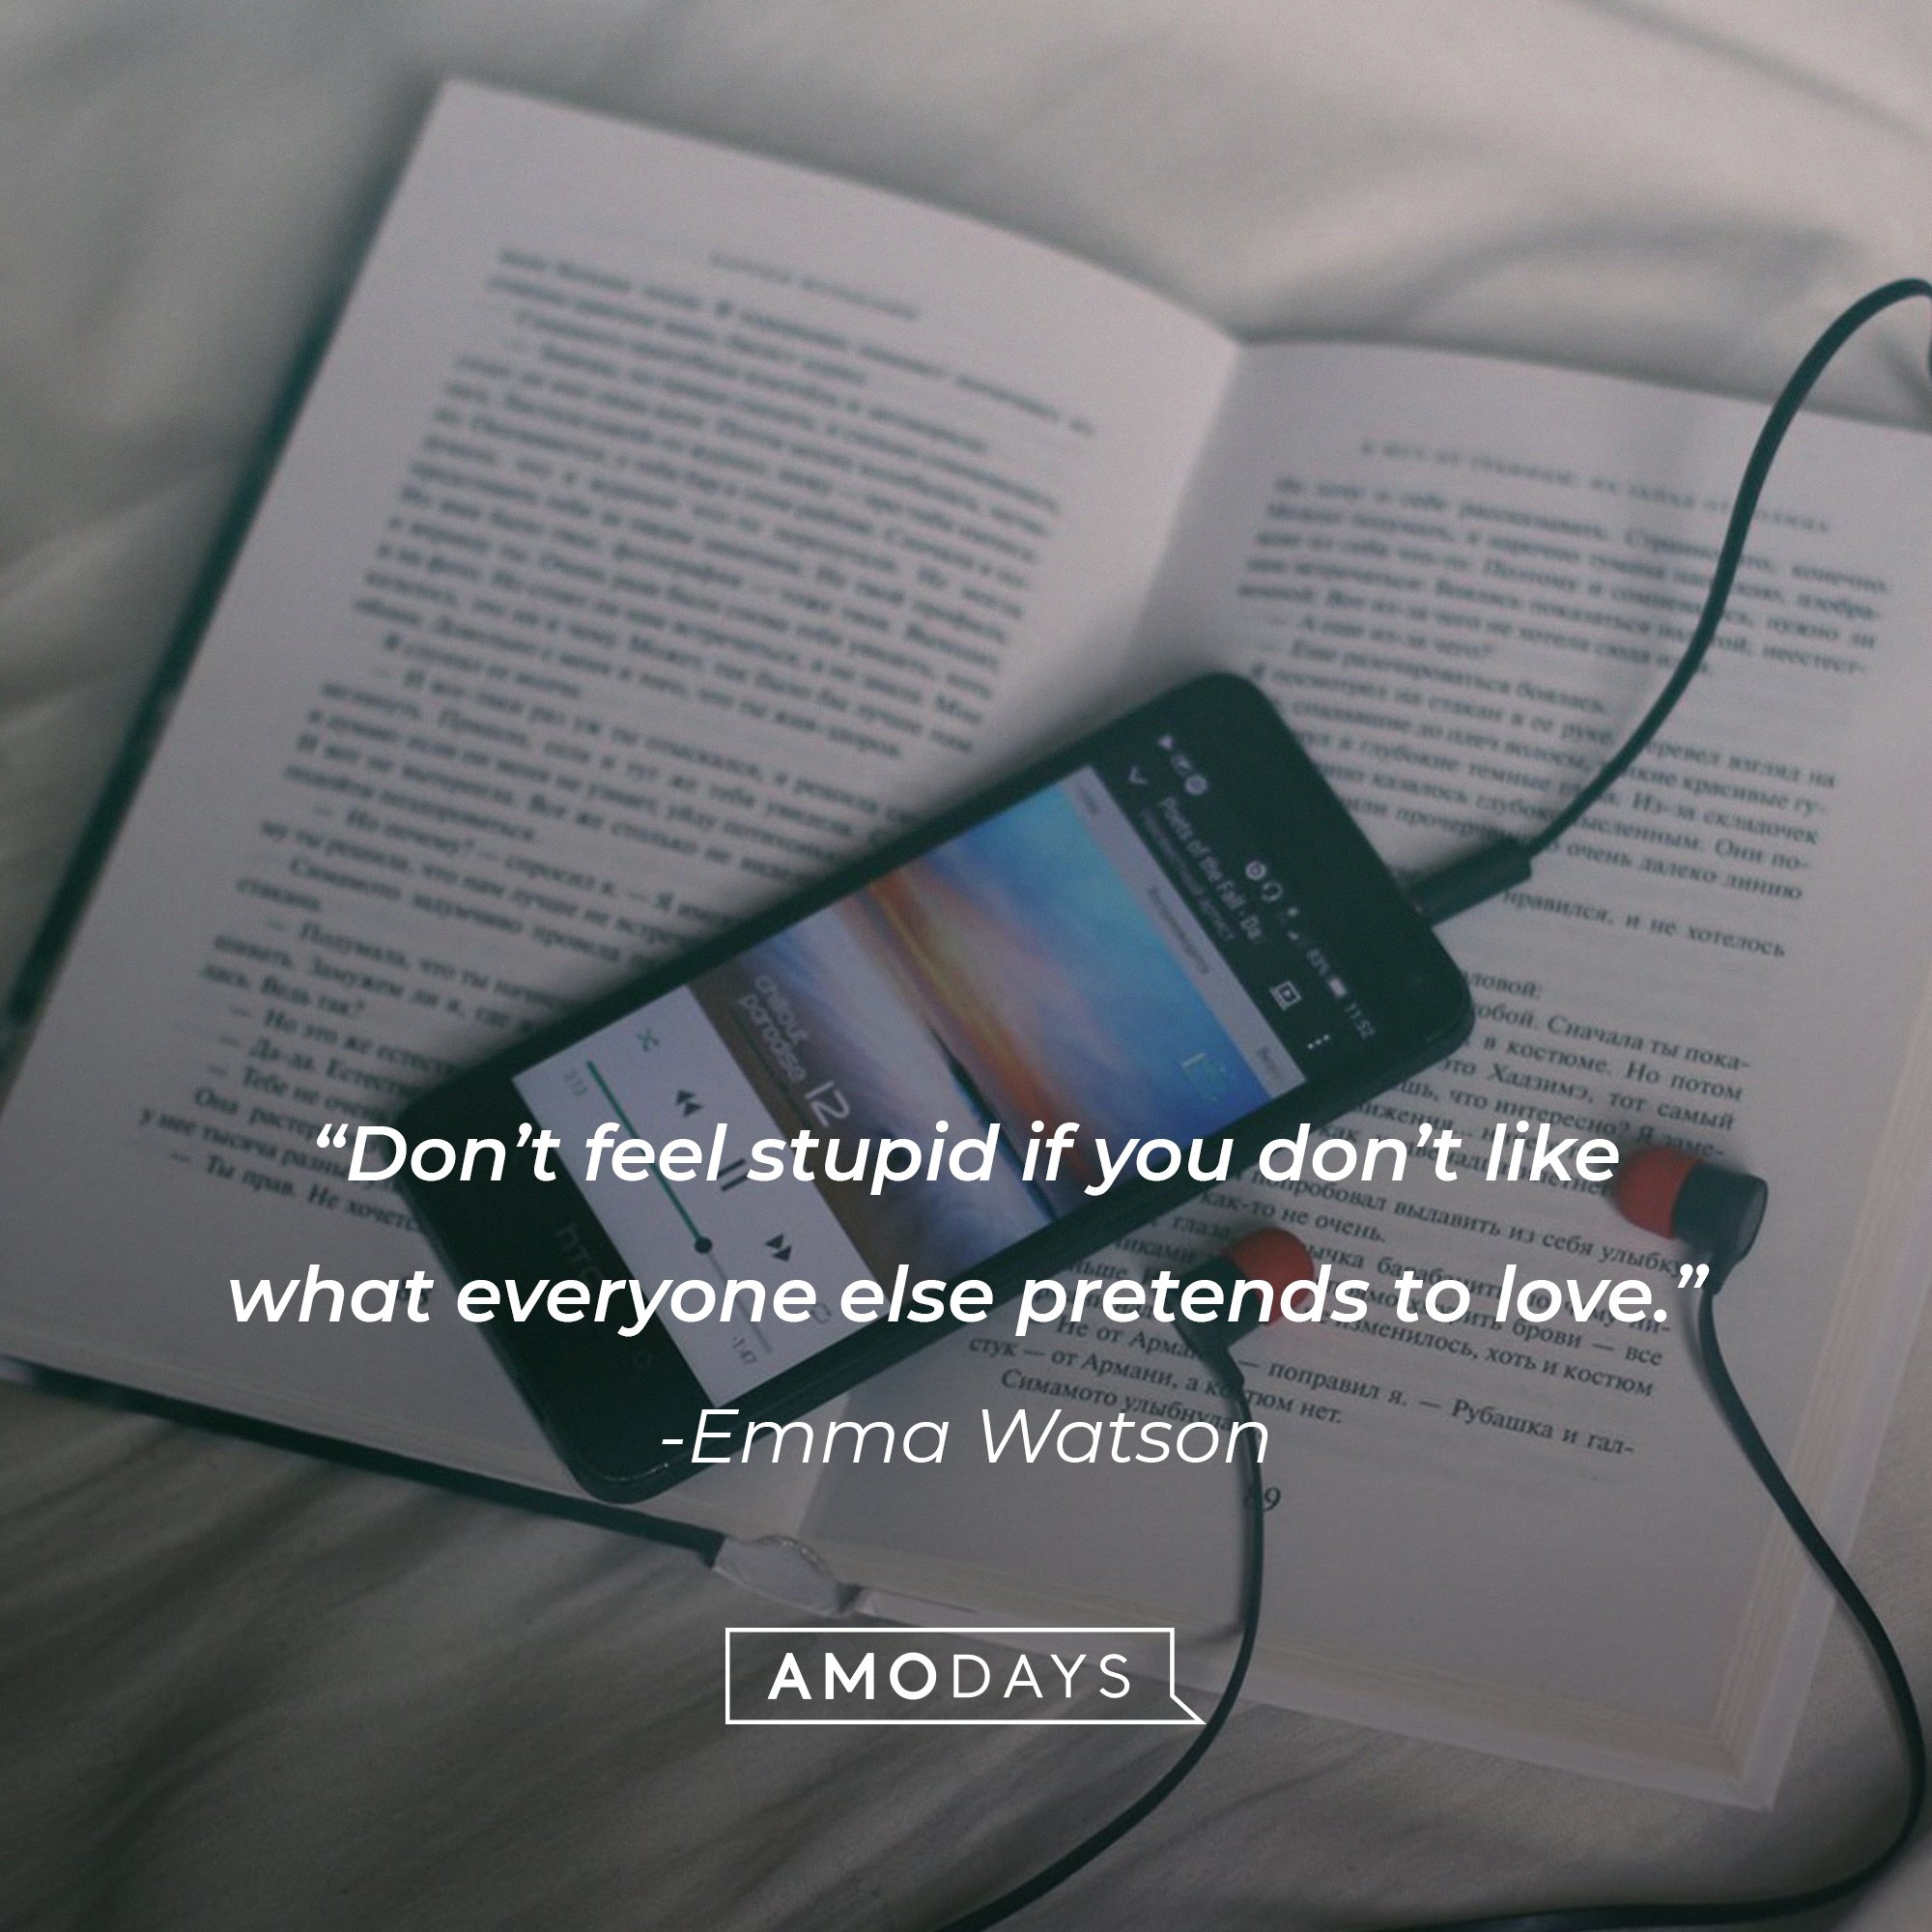  Emma Watson's quote: “Don’t feel stupid if you don’t like what everyone else pretends to love.” | Image: AmoDays